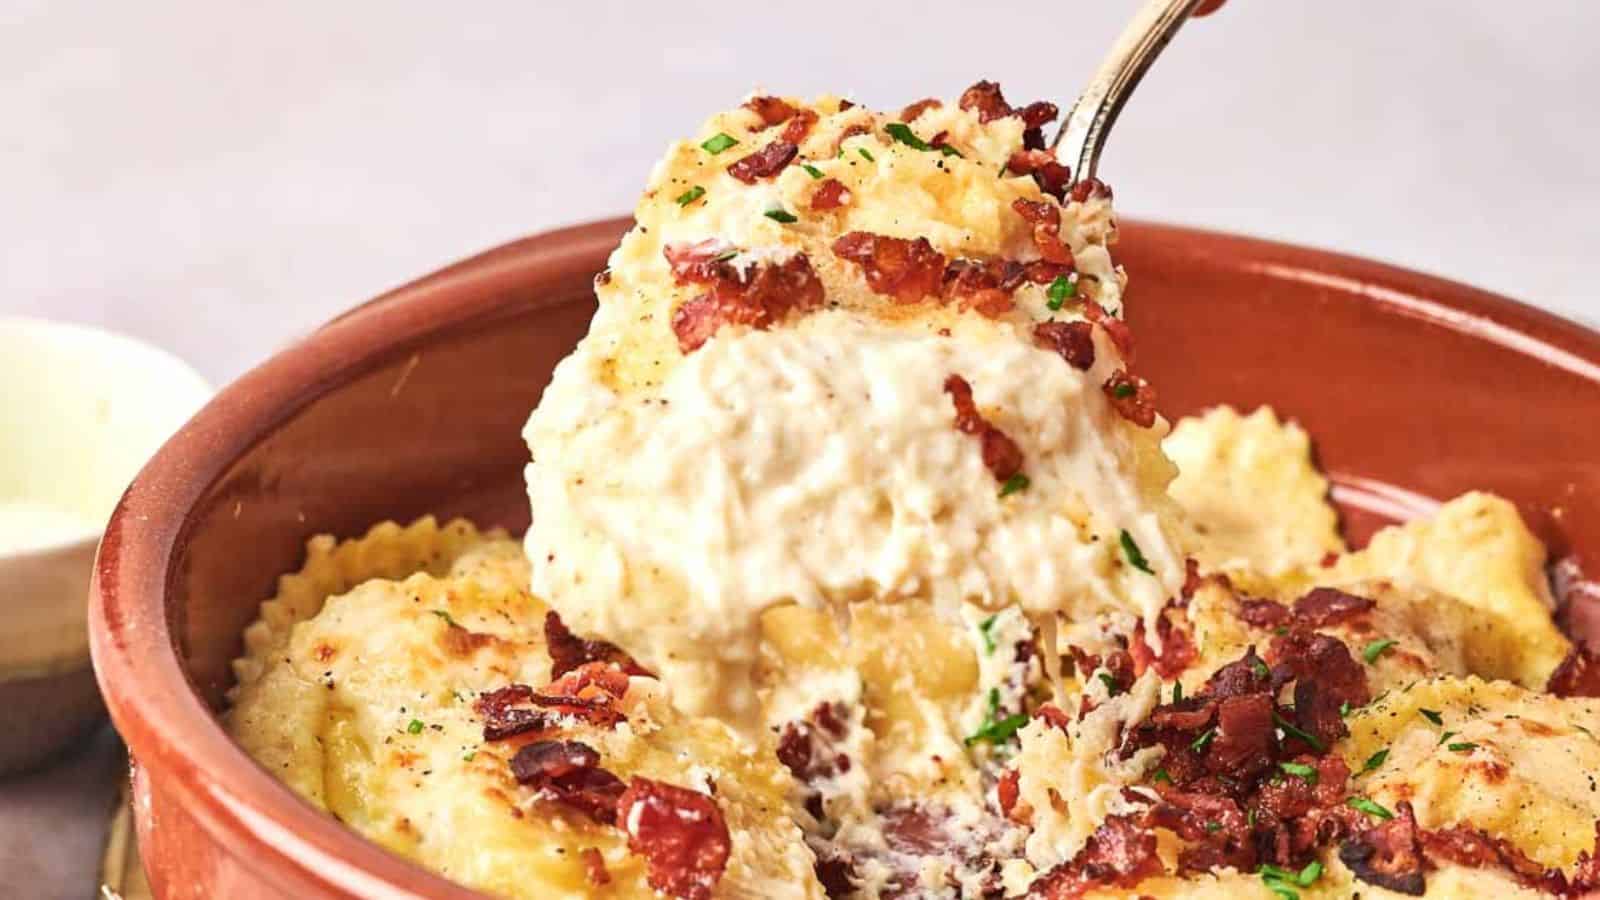 A dish of ravioli with bacon and parsley that can be found at Olive Garden.